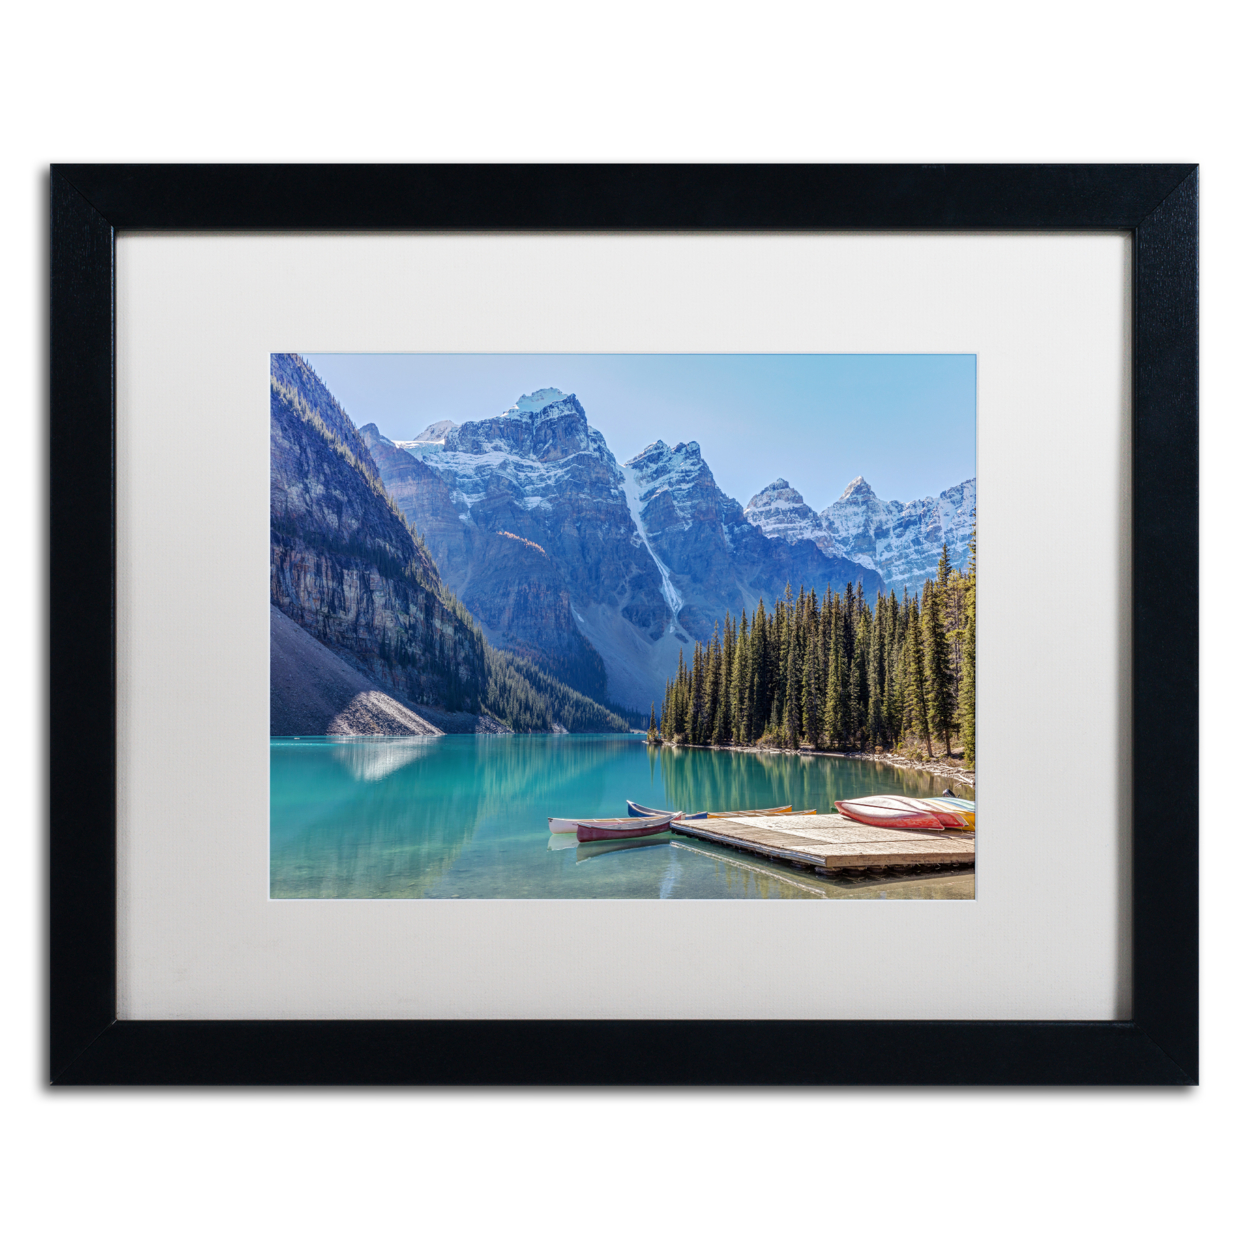 Pierre Leclerc 'Moraine Lake Canoes' Black Wooden Framed Art 18 X 22 Inches